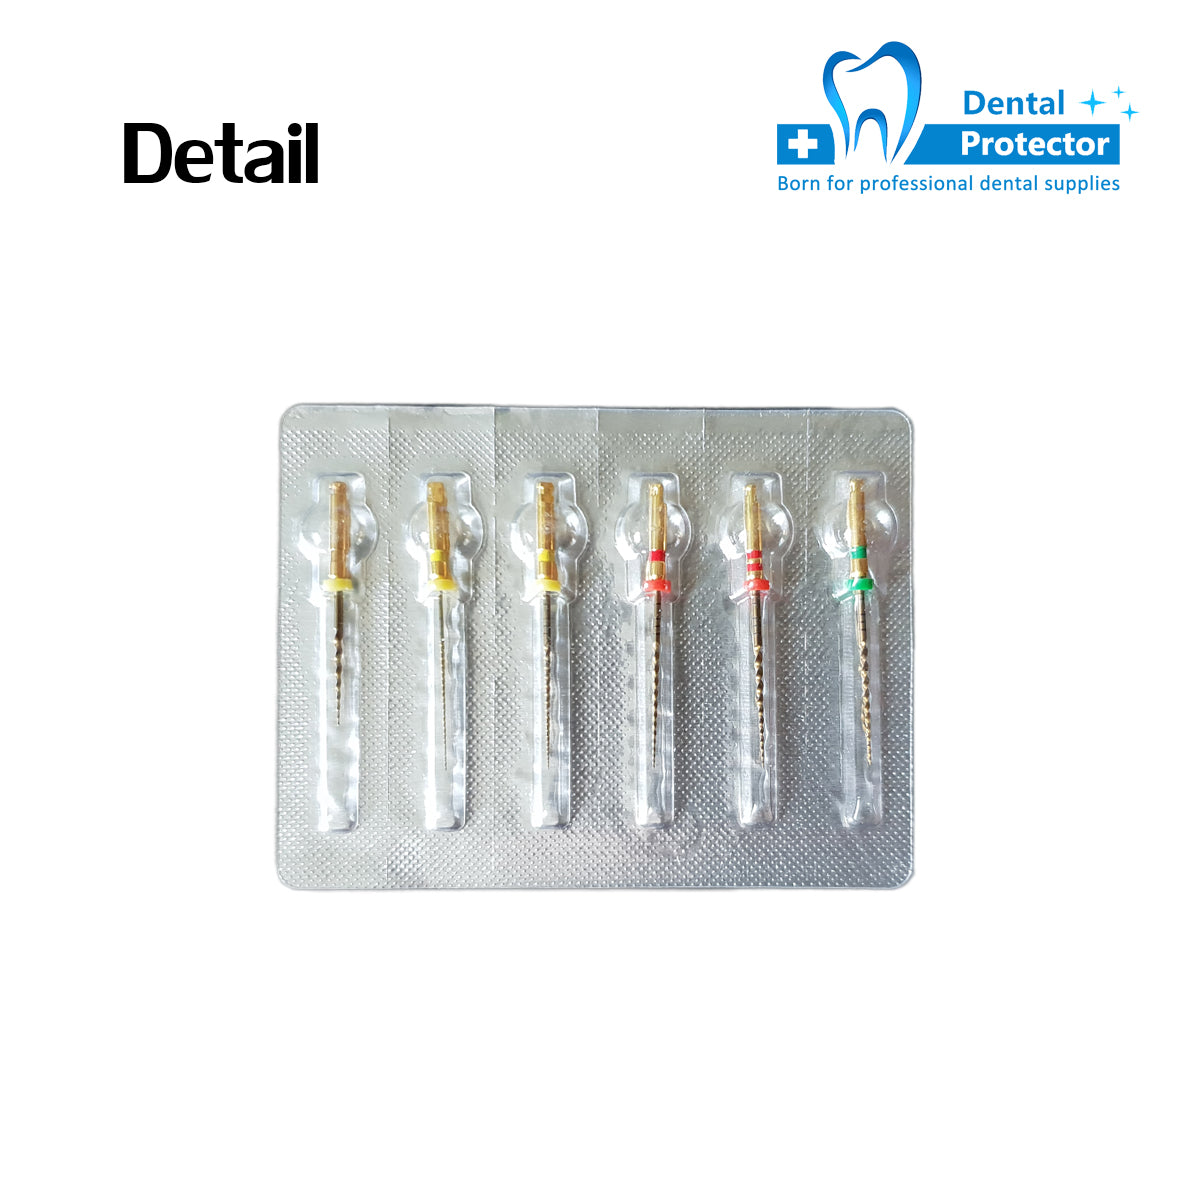 COXO SOCO Dental Niti rotary files , endodontic files , Endo Engine Root Canal Files ,can use for 10-15 root canal , 10 packs